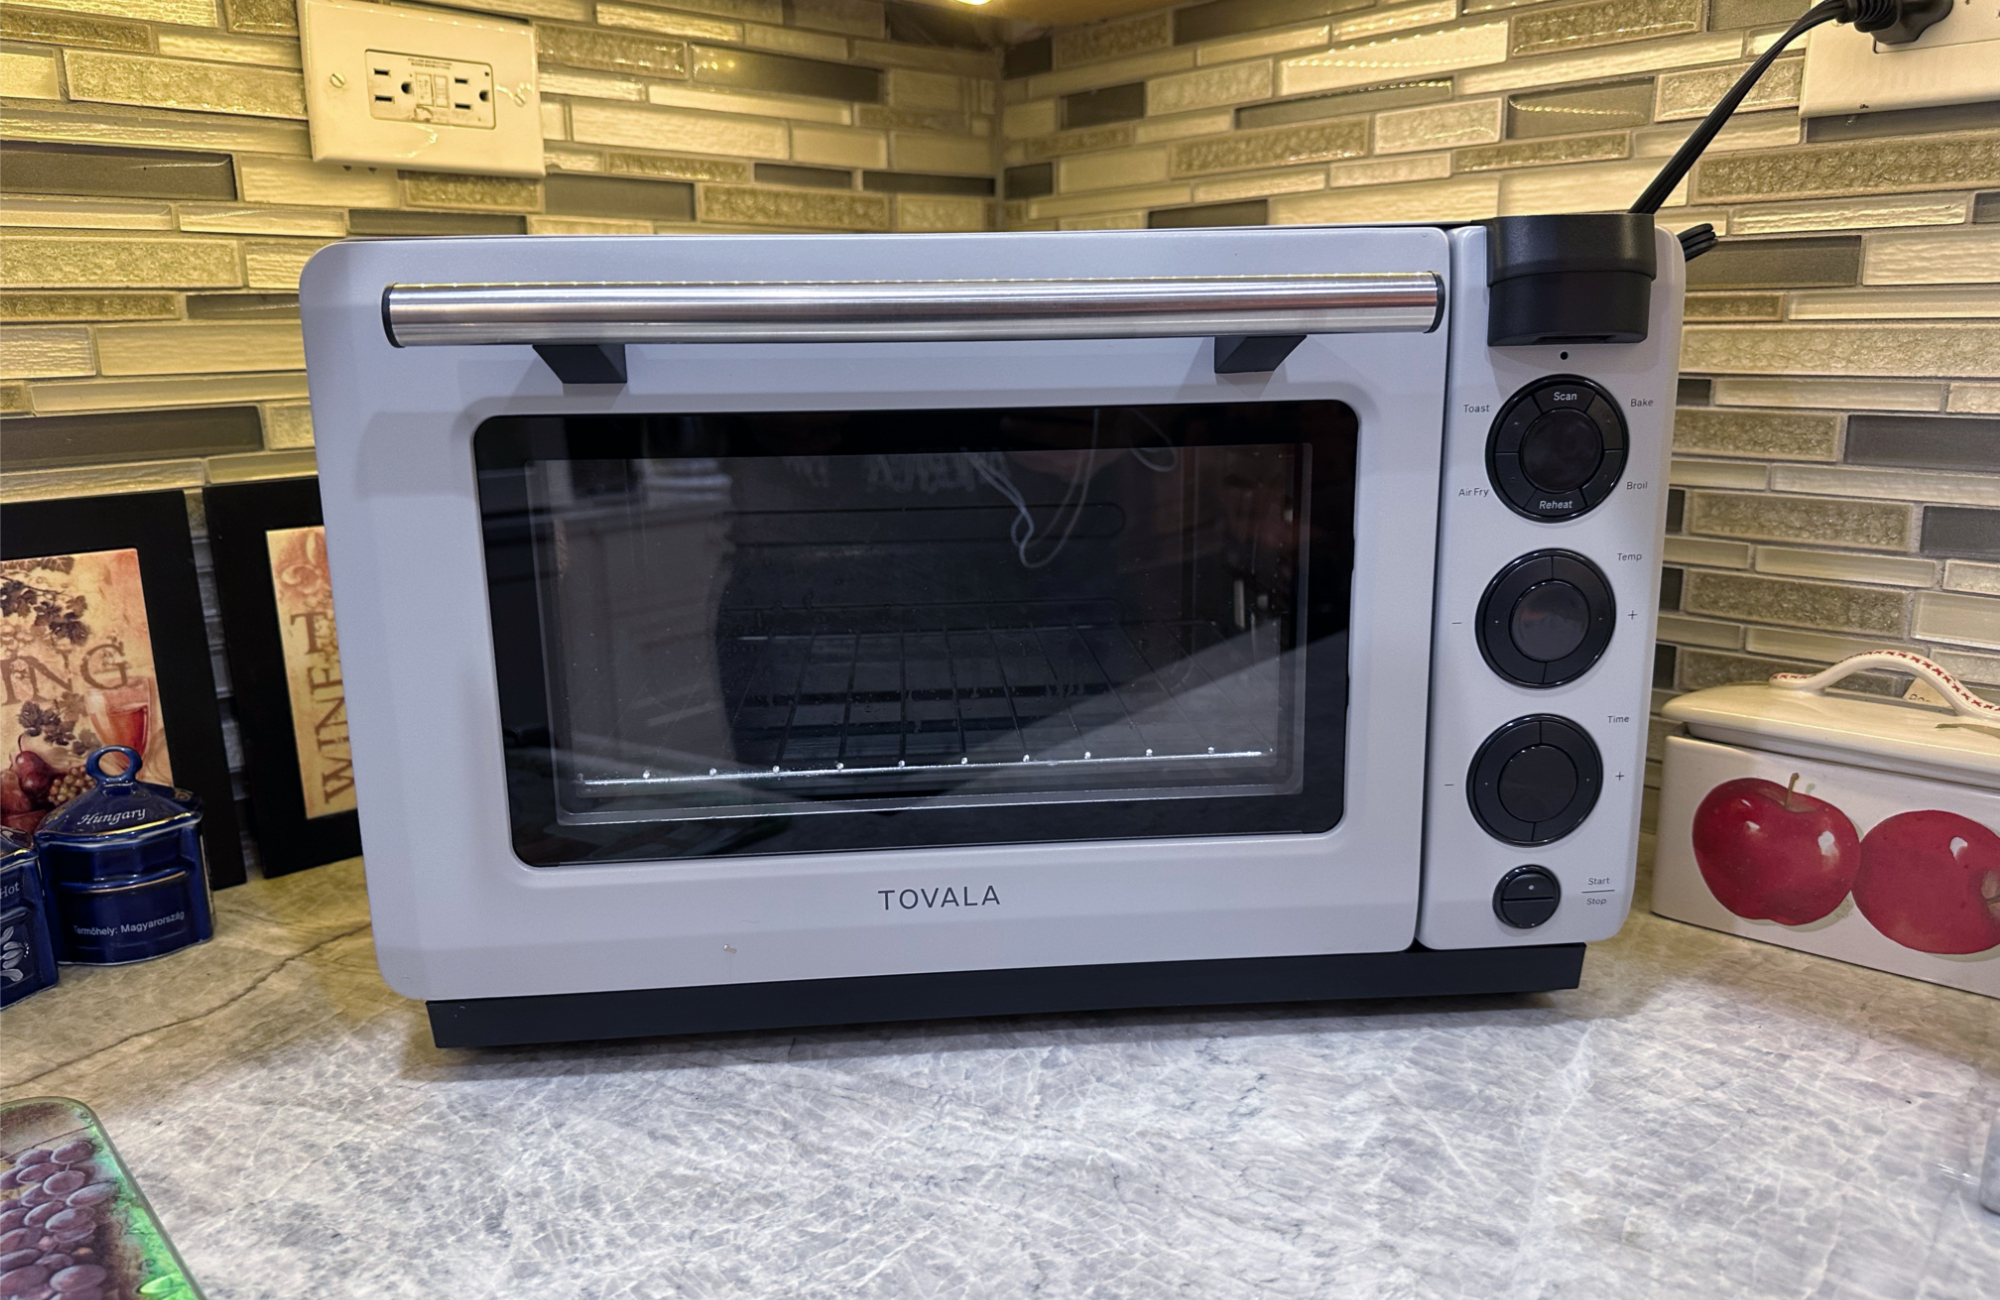 What is your review of the Tovala smart oven? Is a $300 smart oven worth  the cost? - Quora